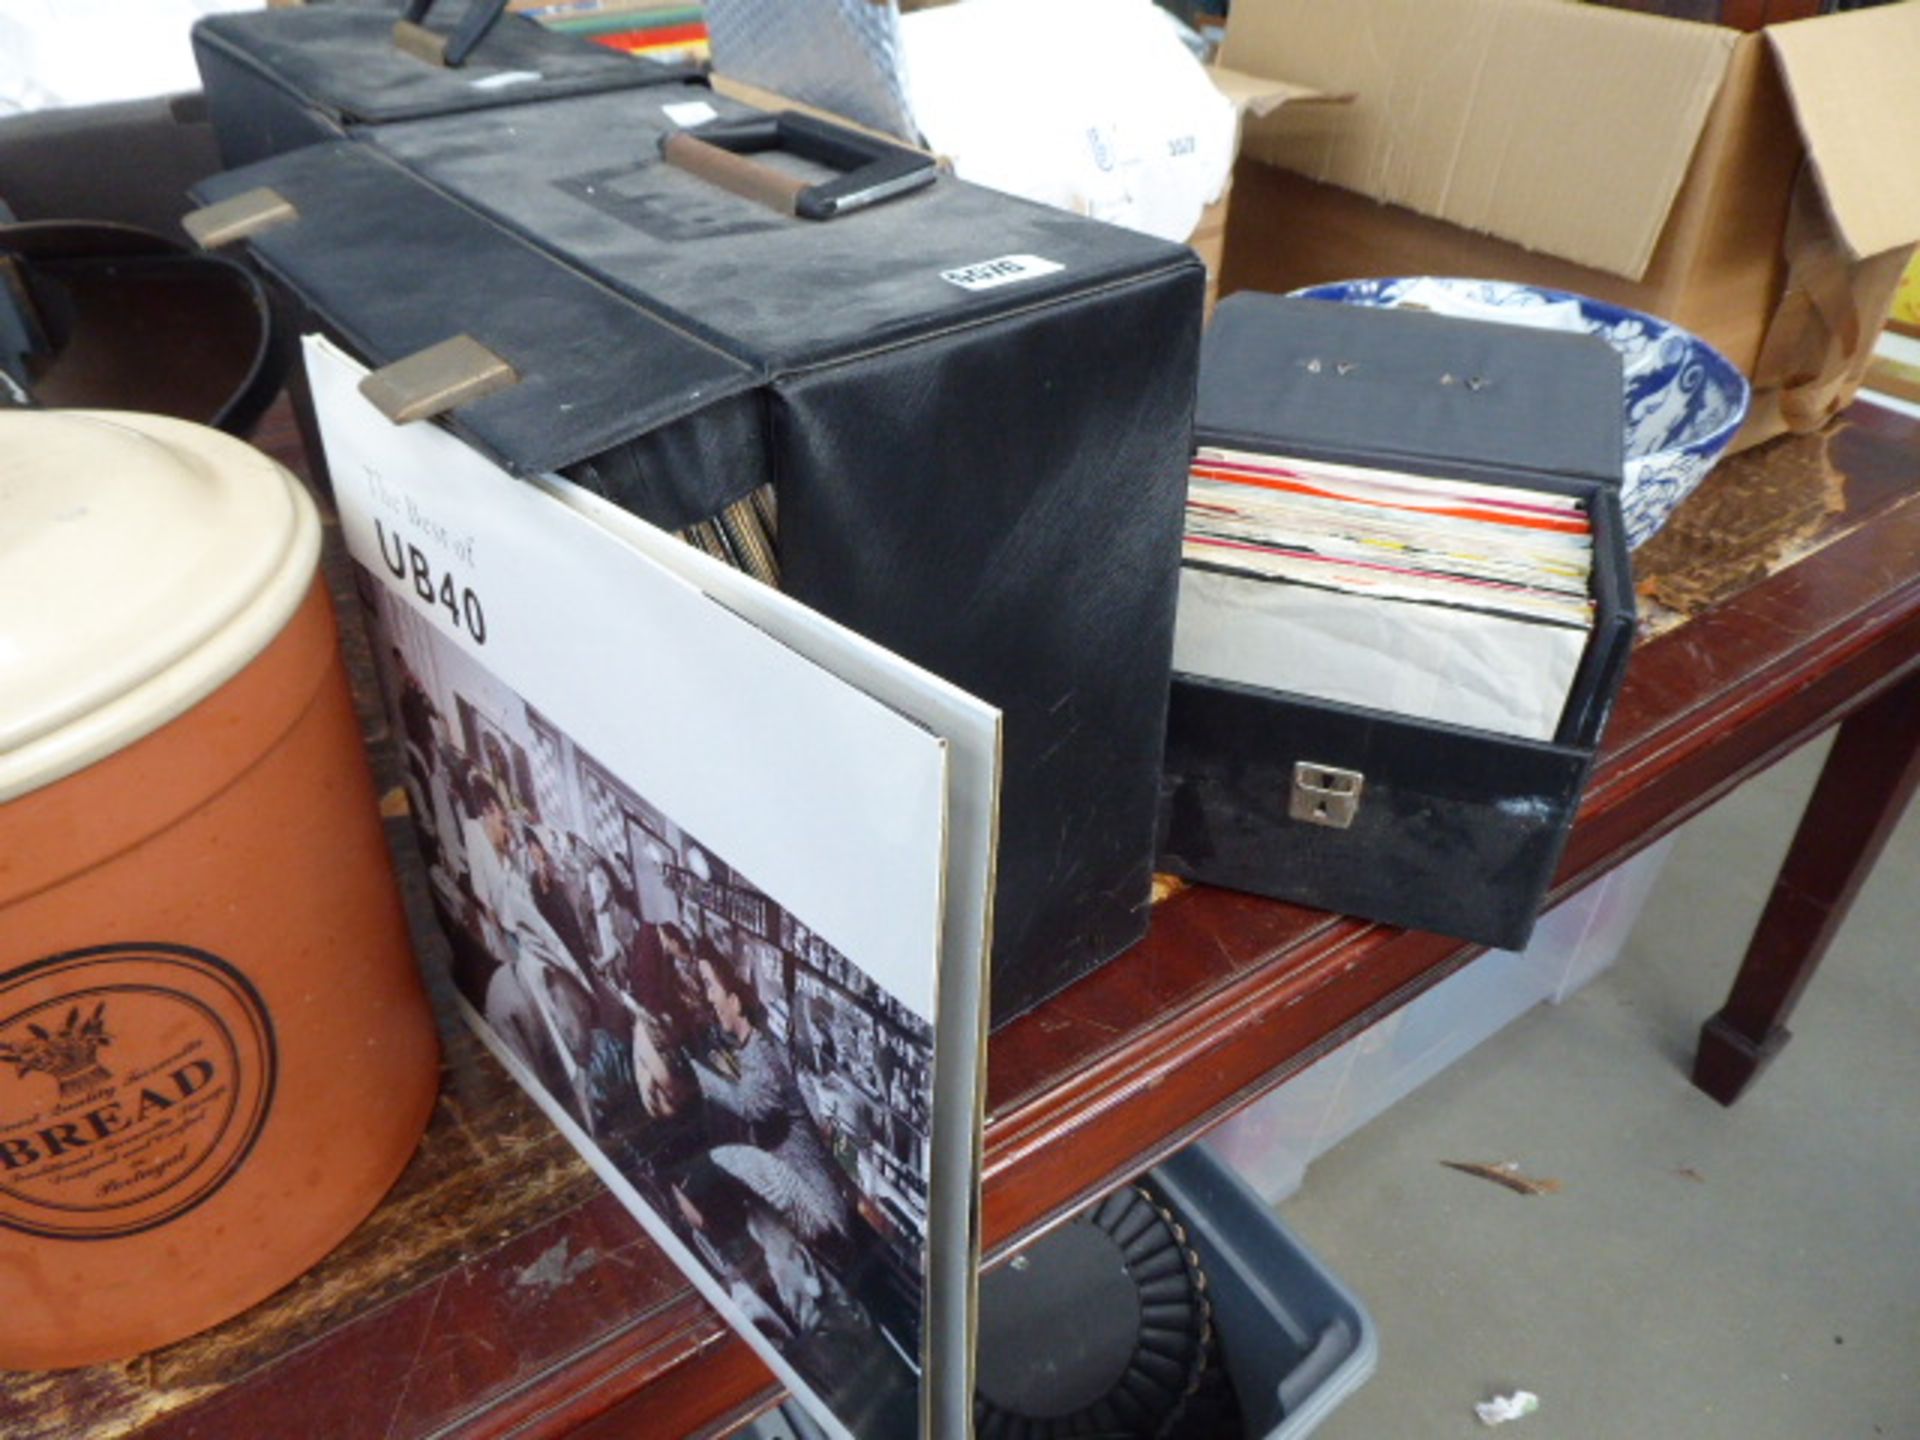 4 Boxes containing vinyl records